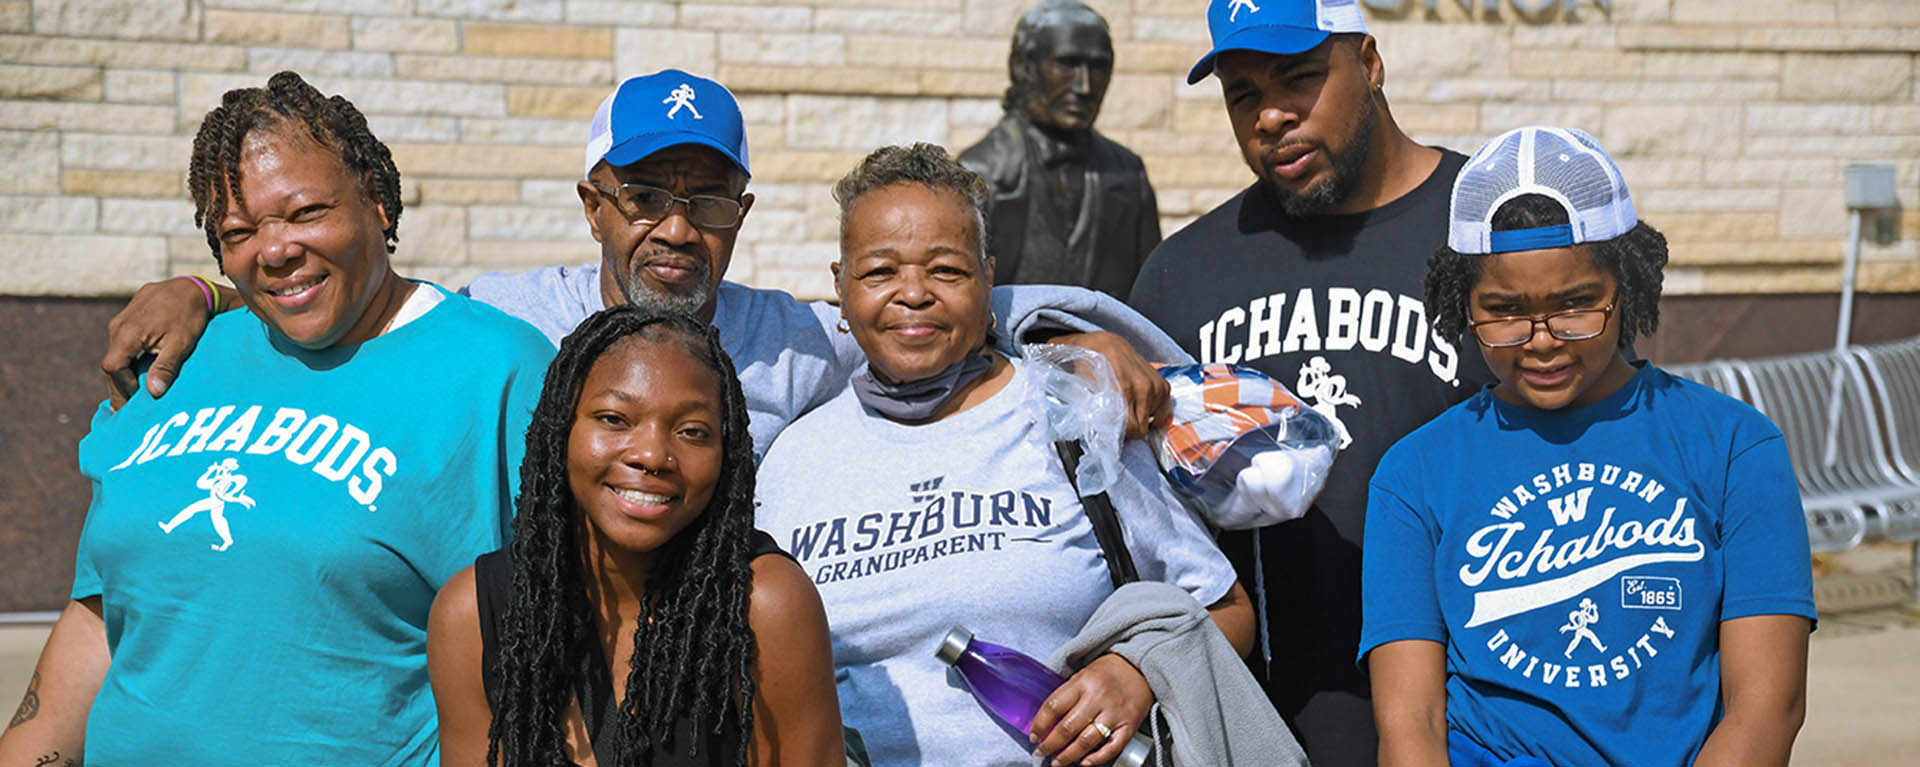 A family wearing Washburn clothing poses for a photo on Family Day.